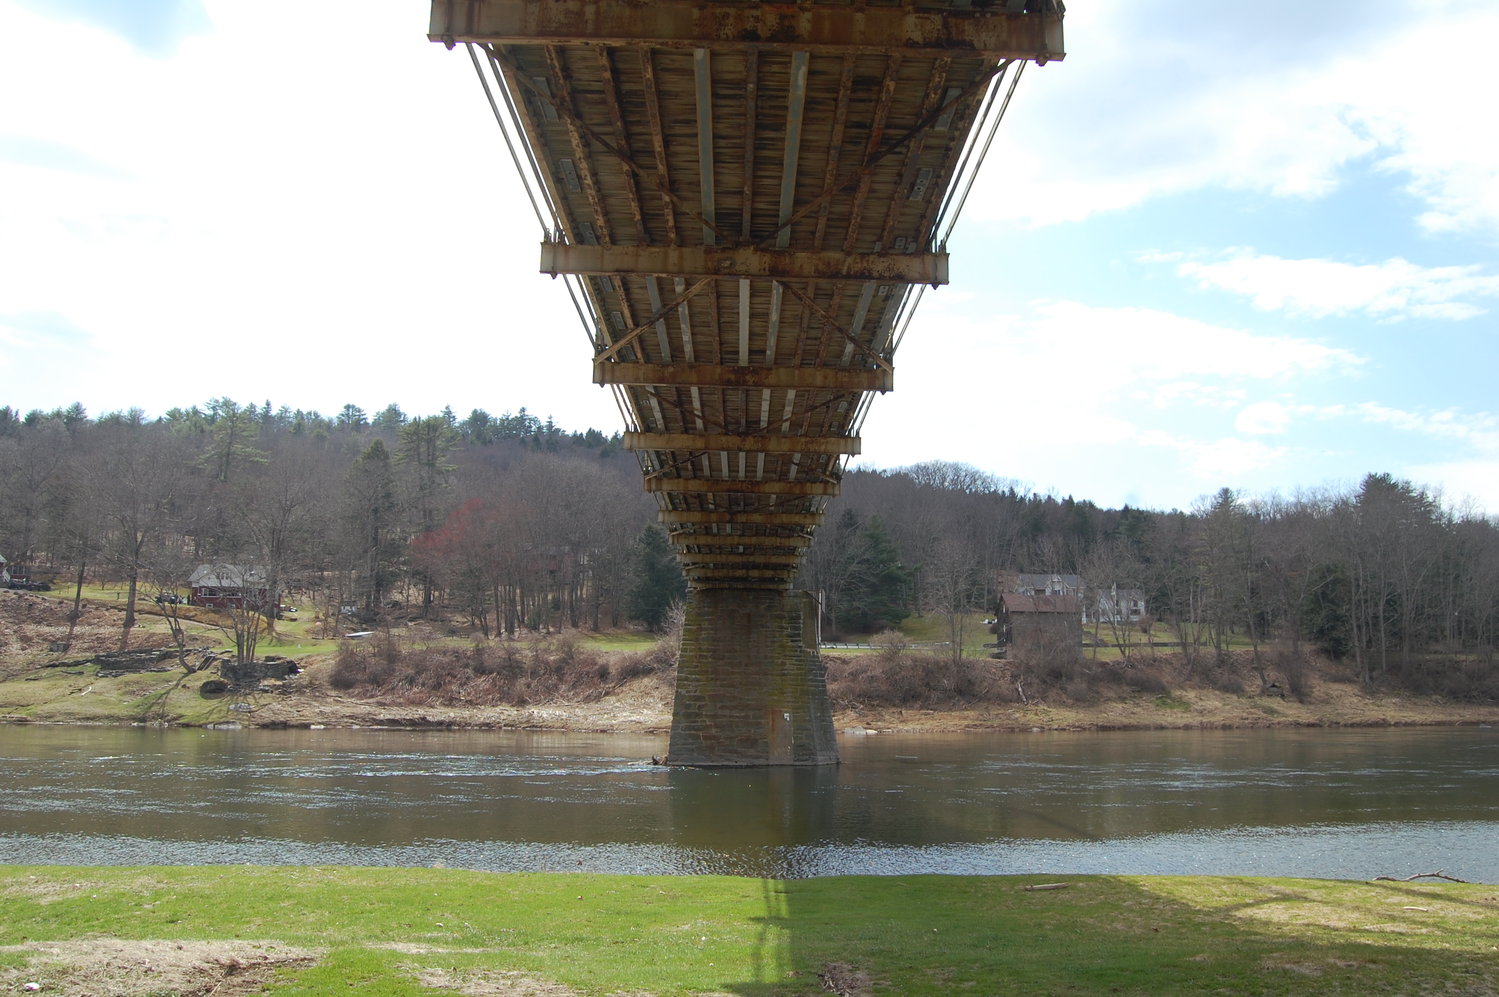 The Skinners Falls bridge has been closed since October 2019.